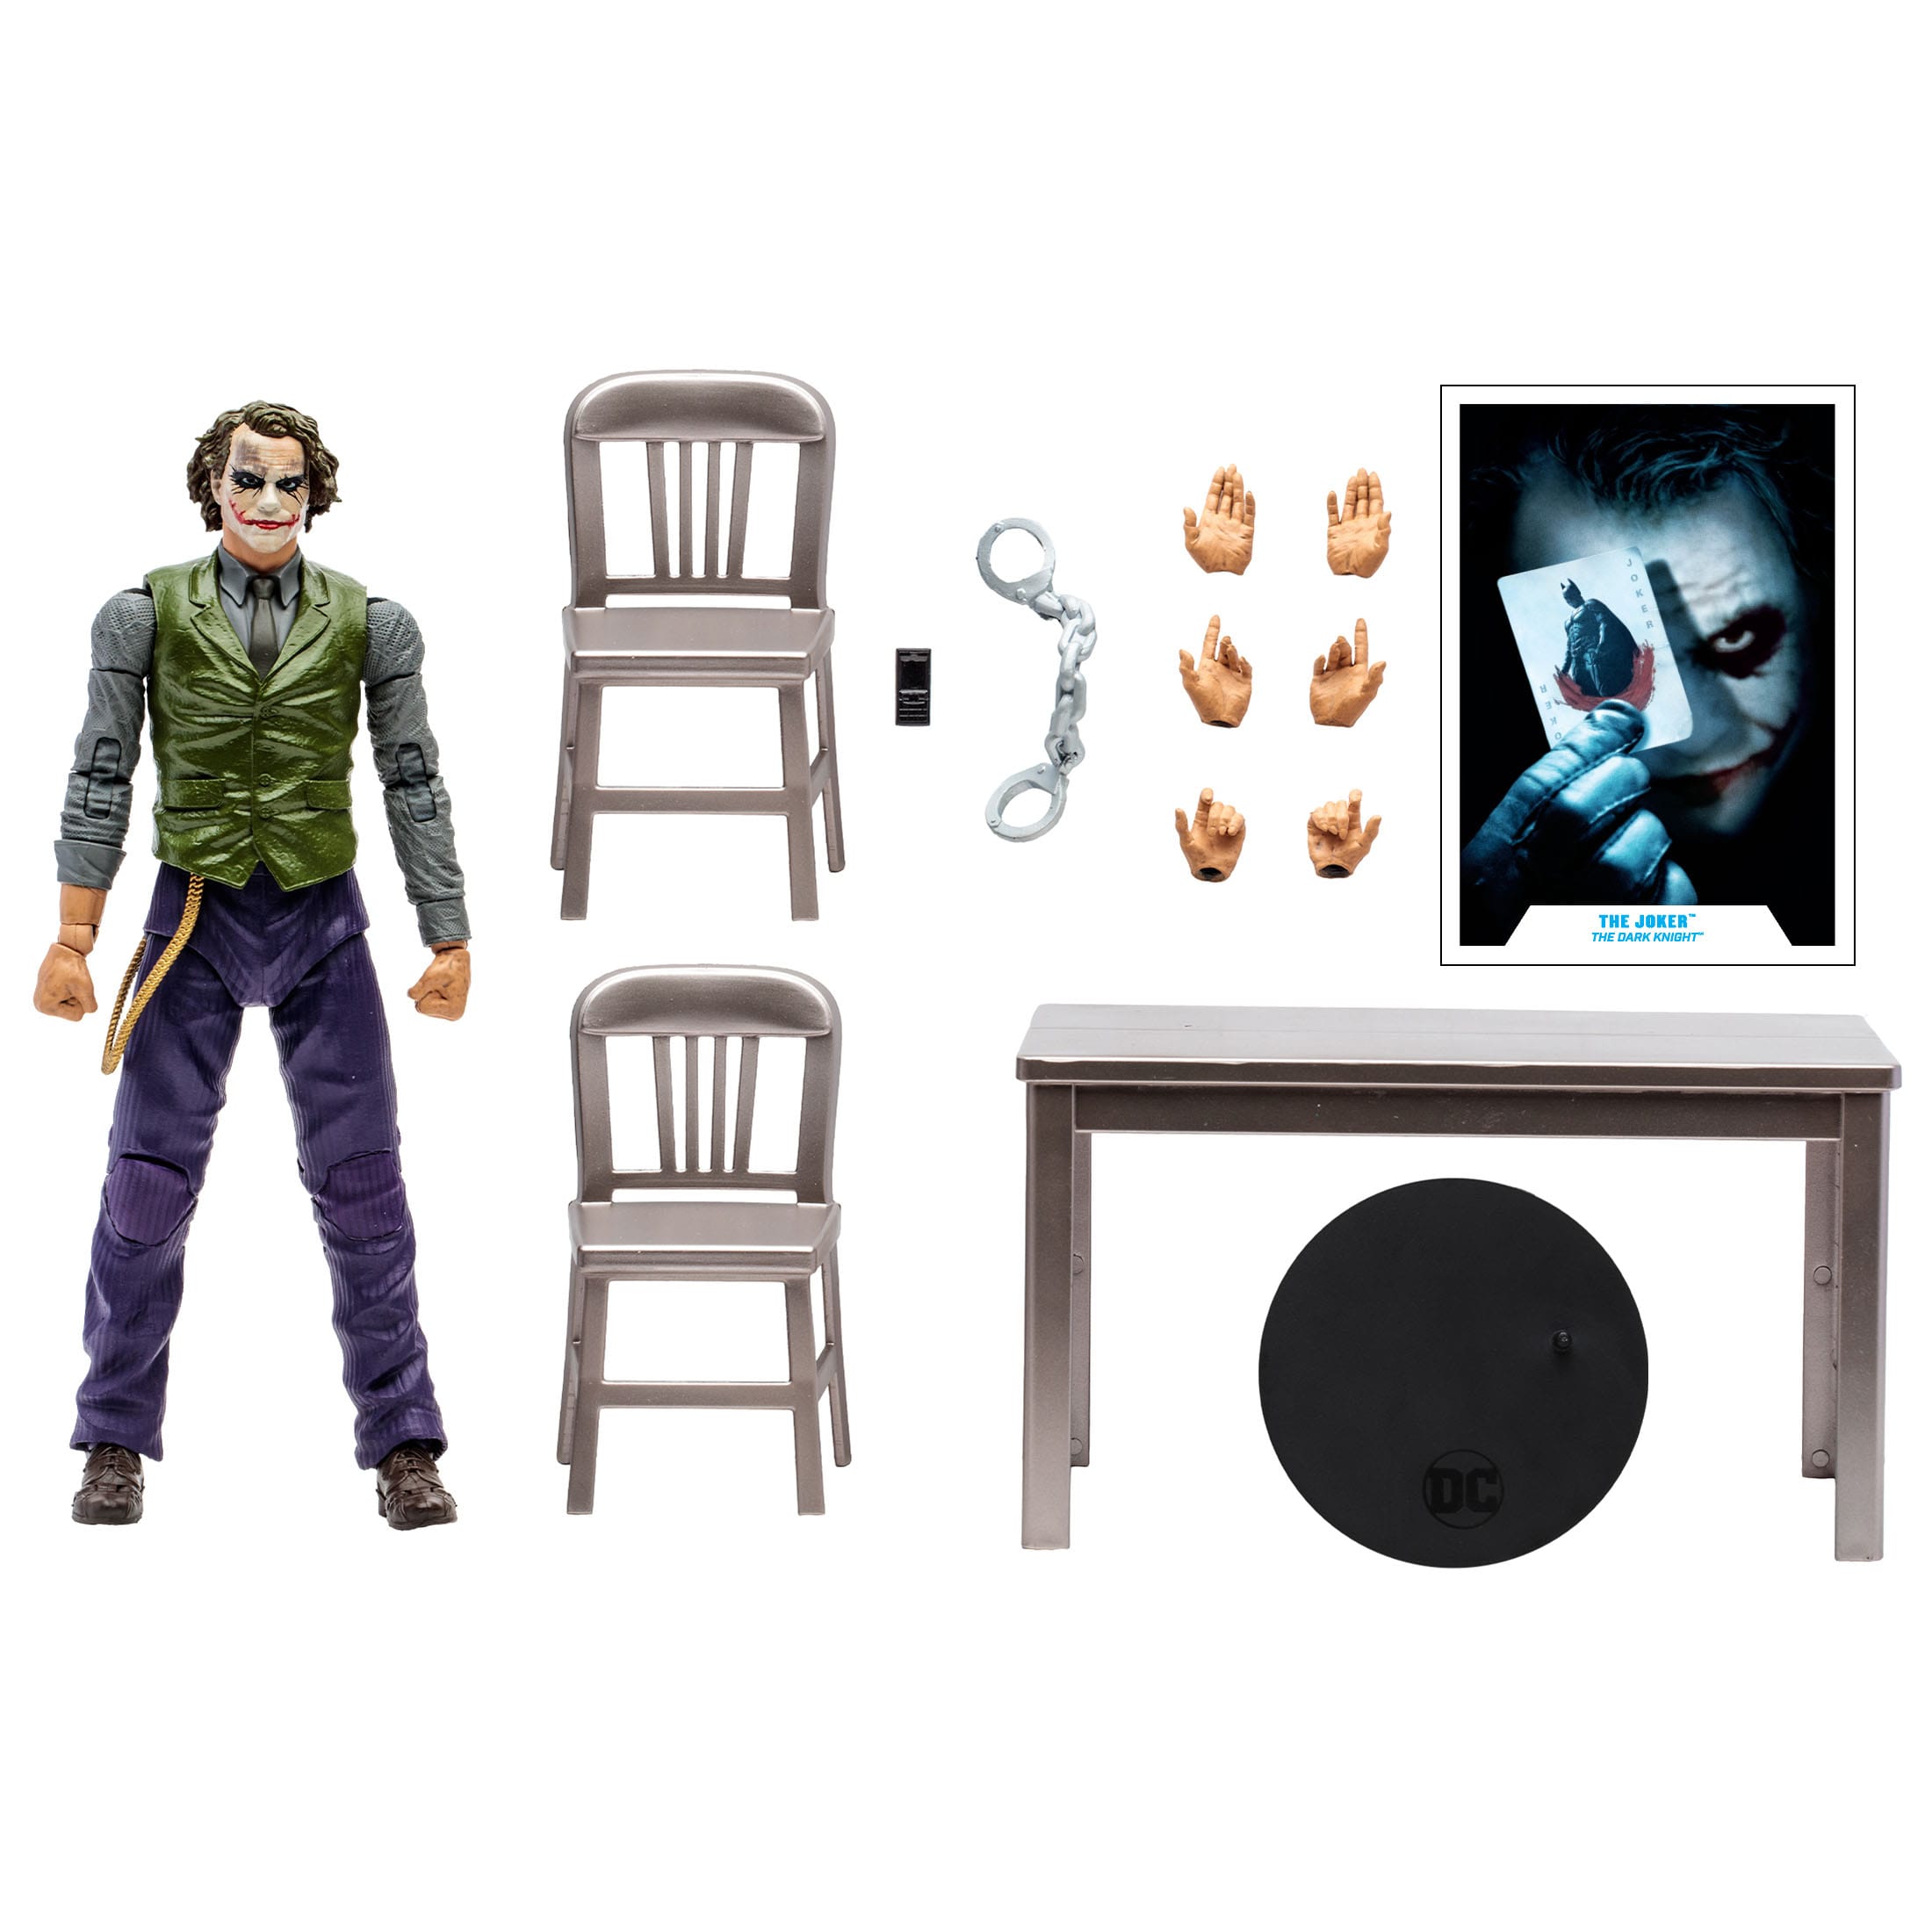 DC Multiverse Actionfigur The Joker (Jail Cell Variant) (The Dark Knight) (Gold Label) 18 cm MCF15399 787926153996